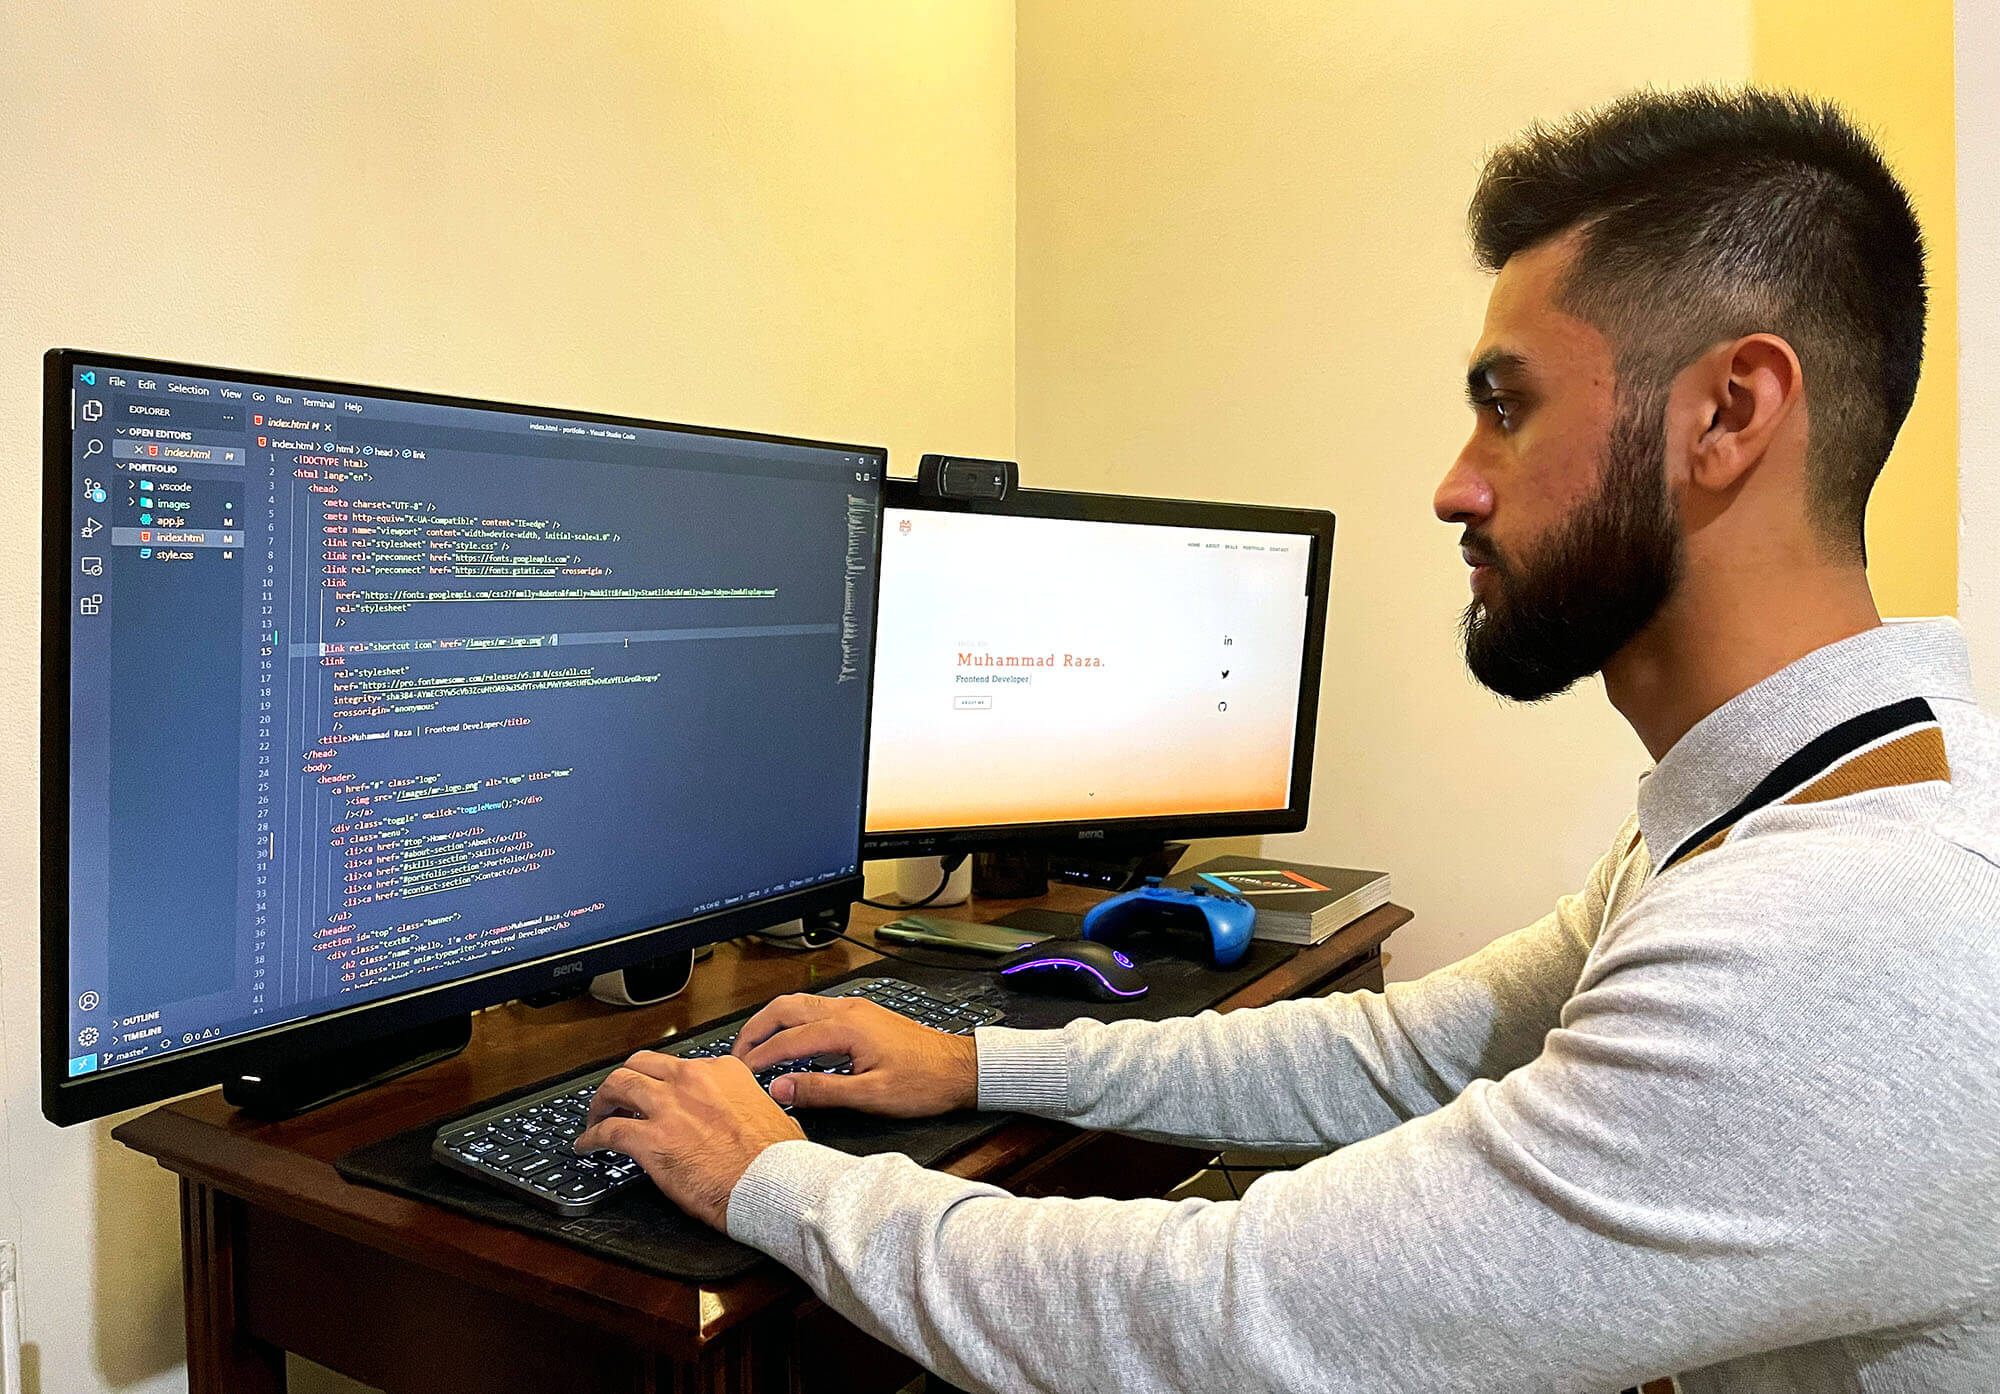 A man work at two computer screens, one of which displays lots of code.